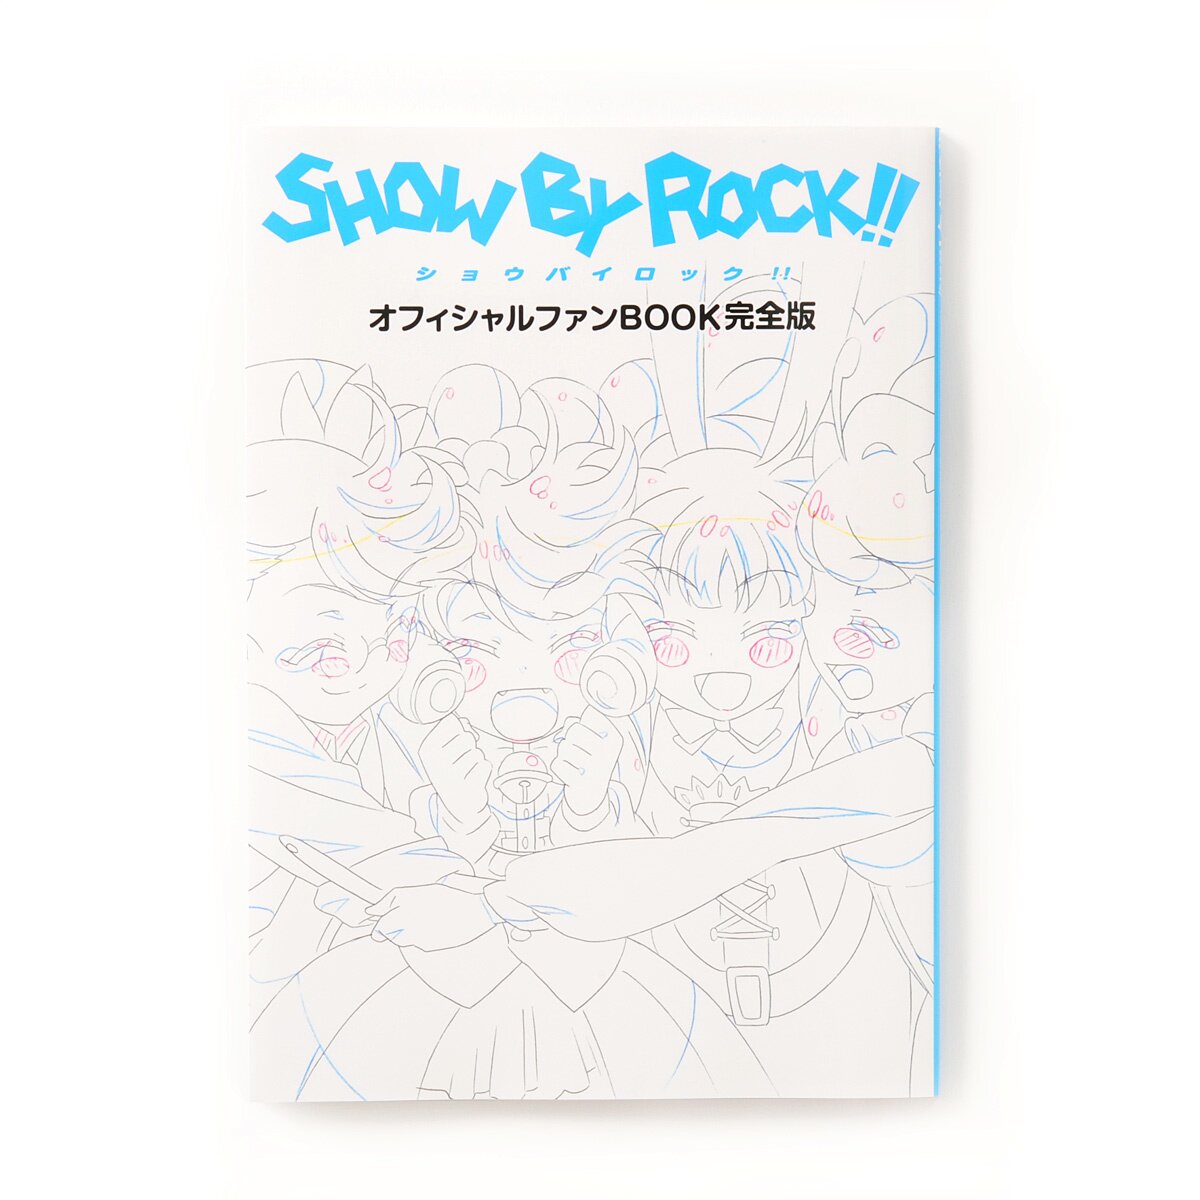  SHOW BY ROCK !! ALL CHARACTERS BOOK Character Guide JAPANESE  GAME BOOK: 9784046018342: Sanrio: Books